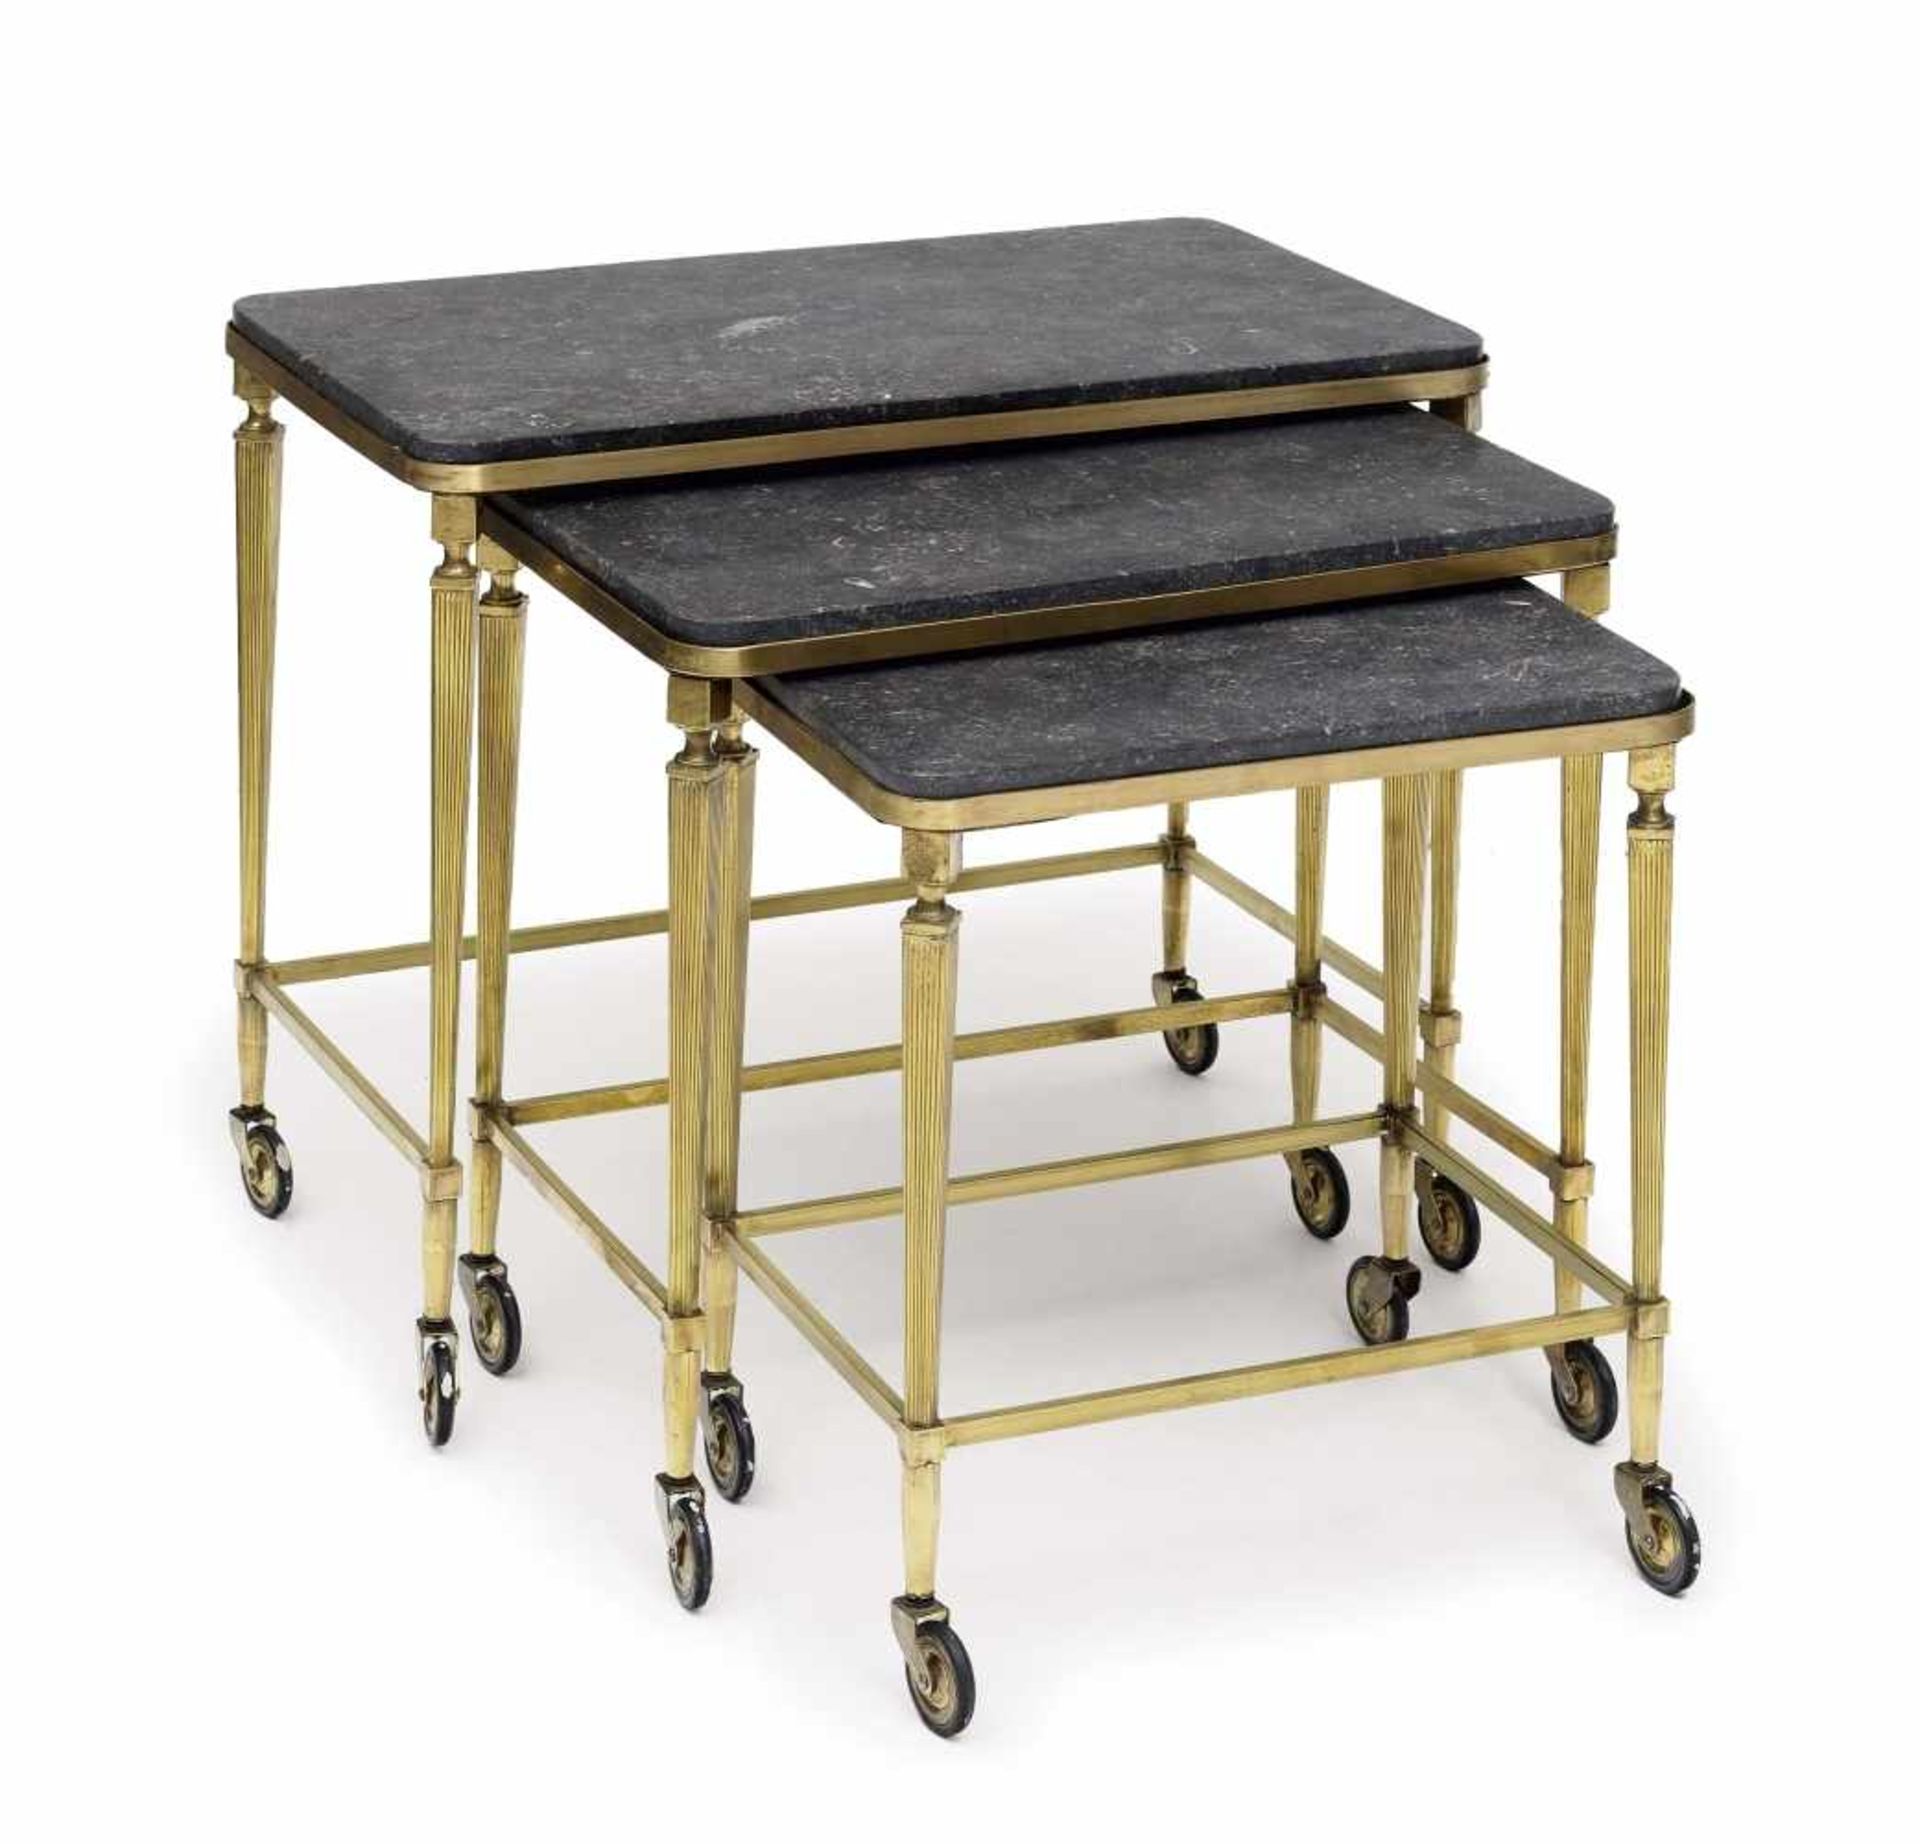 Three nesting tablesFrance or Italy, circa 1940/50 Brass, marble tops. Fluted legs on wheels. 53 x